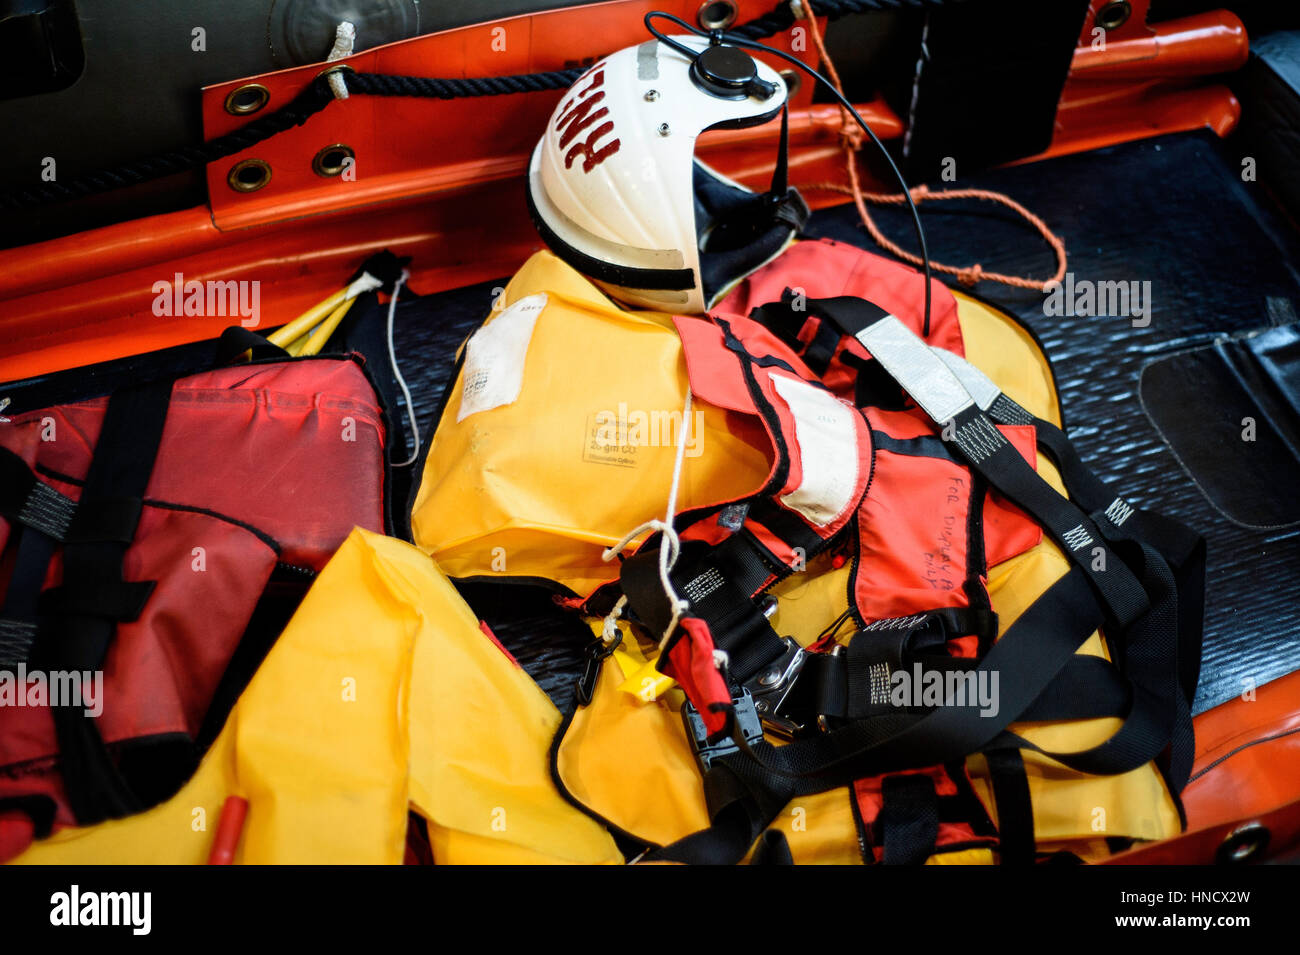 RNLI (Royal National Lifeboat Institution) Stock Photo